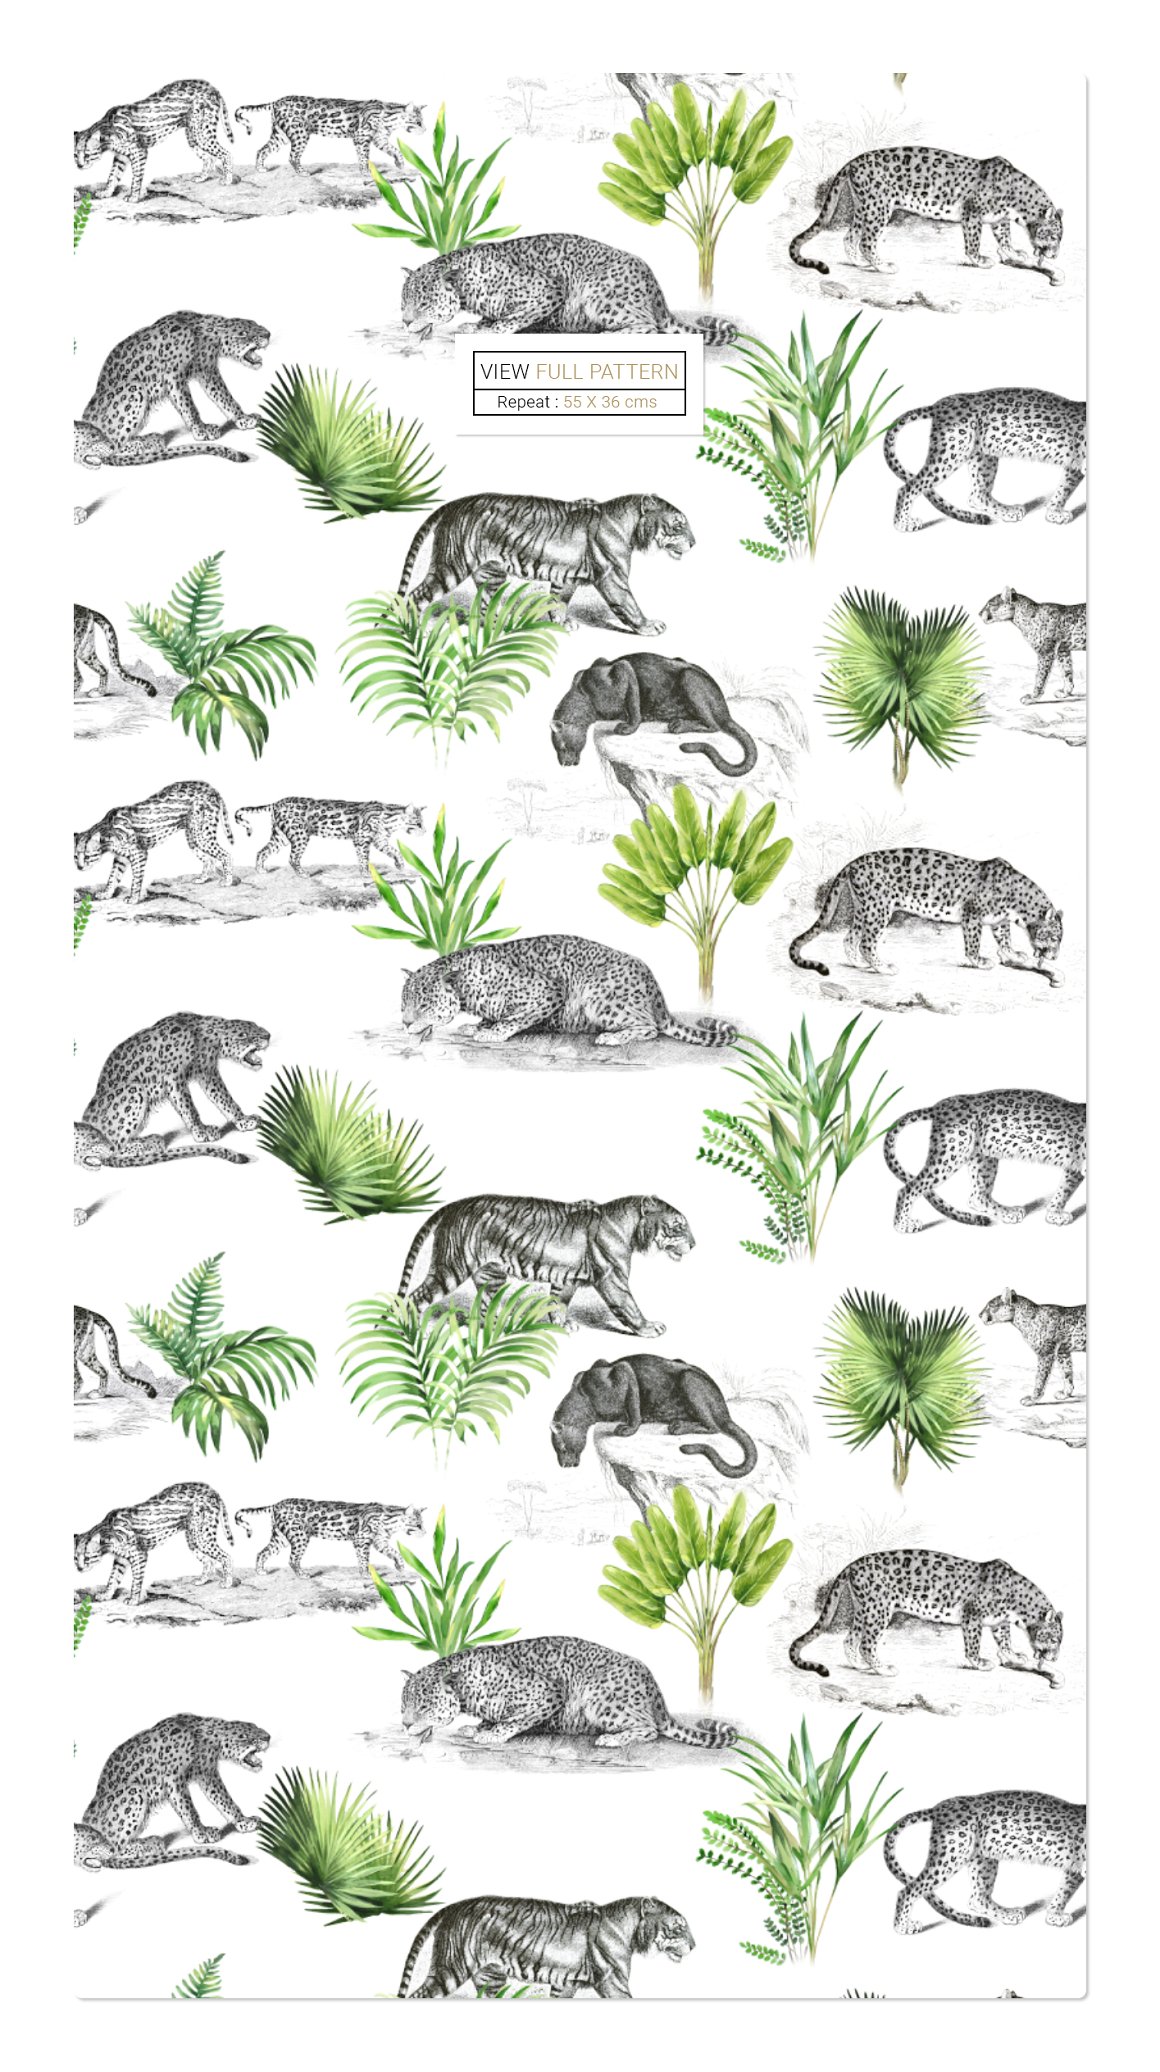 Seamless pattern set of animals and plants on a white background.